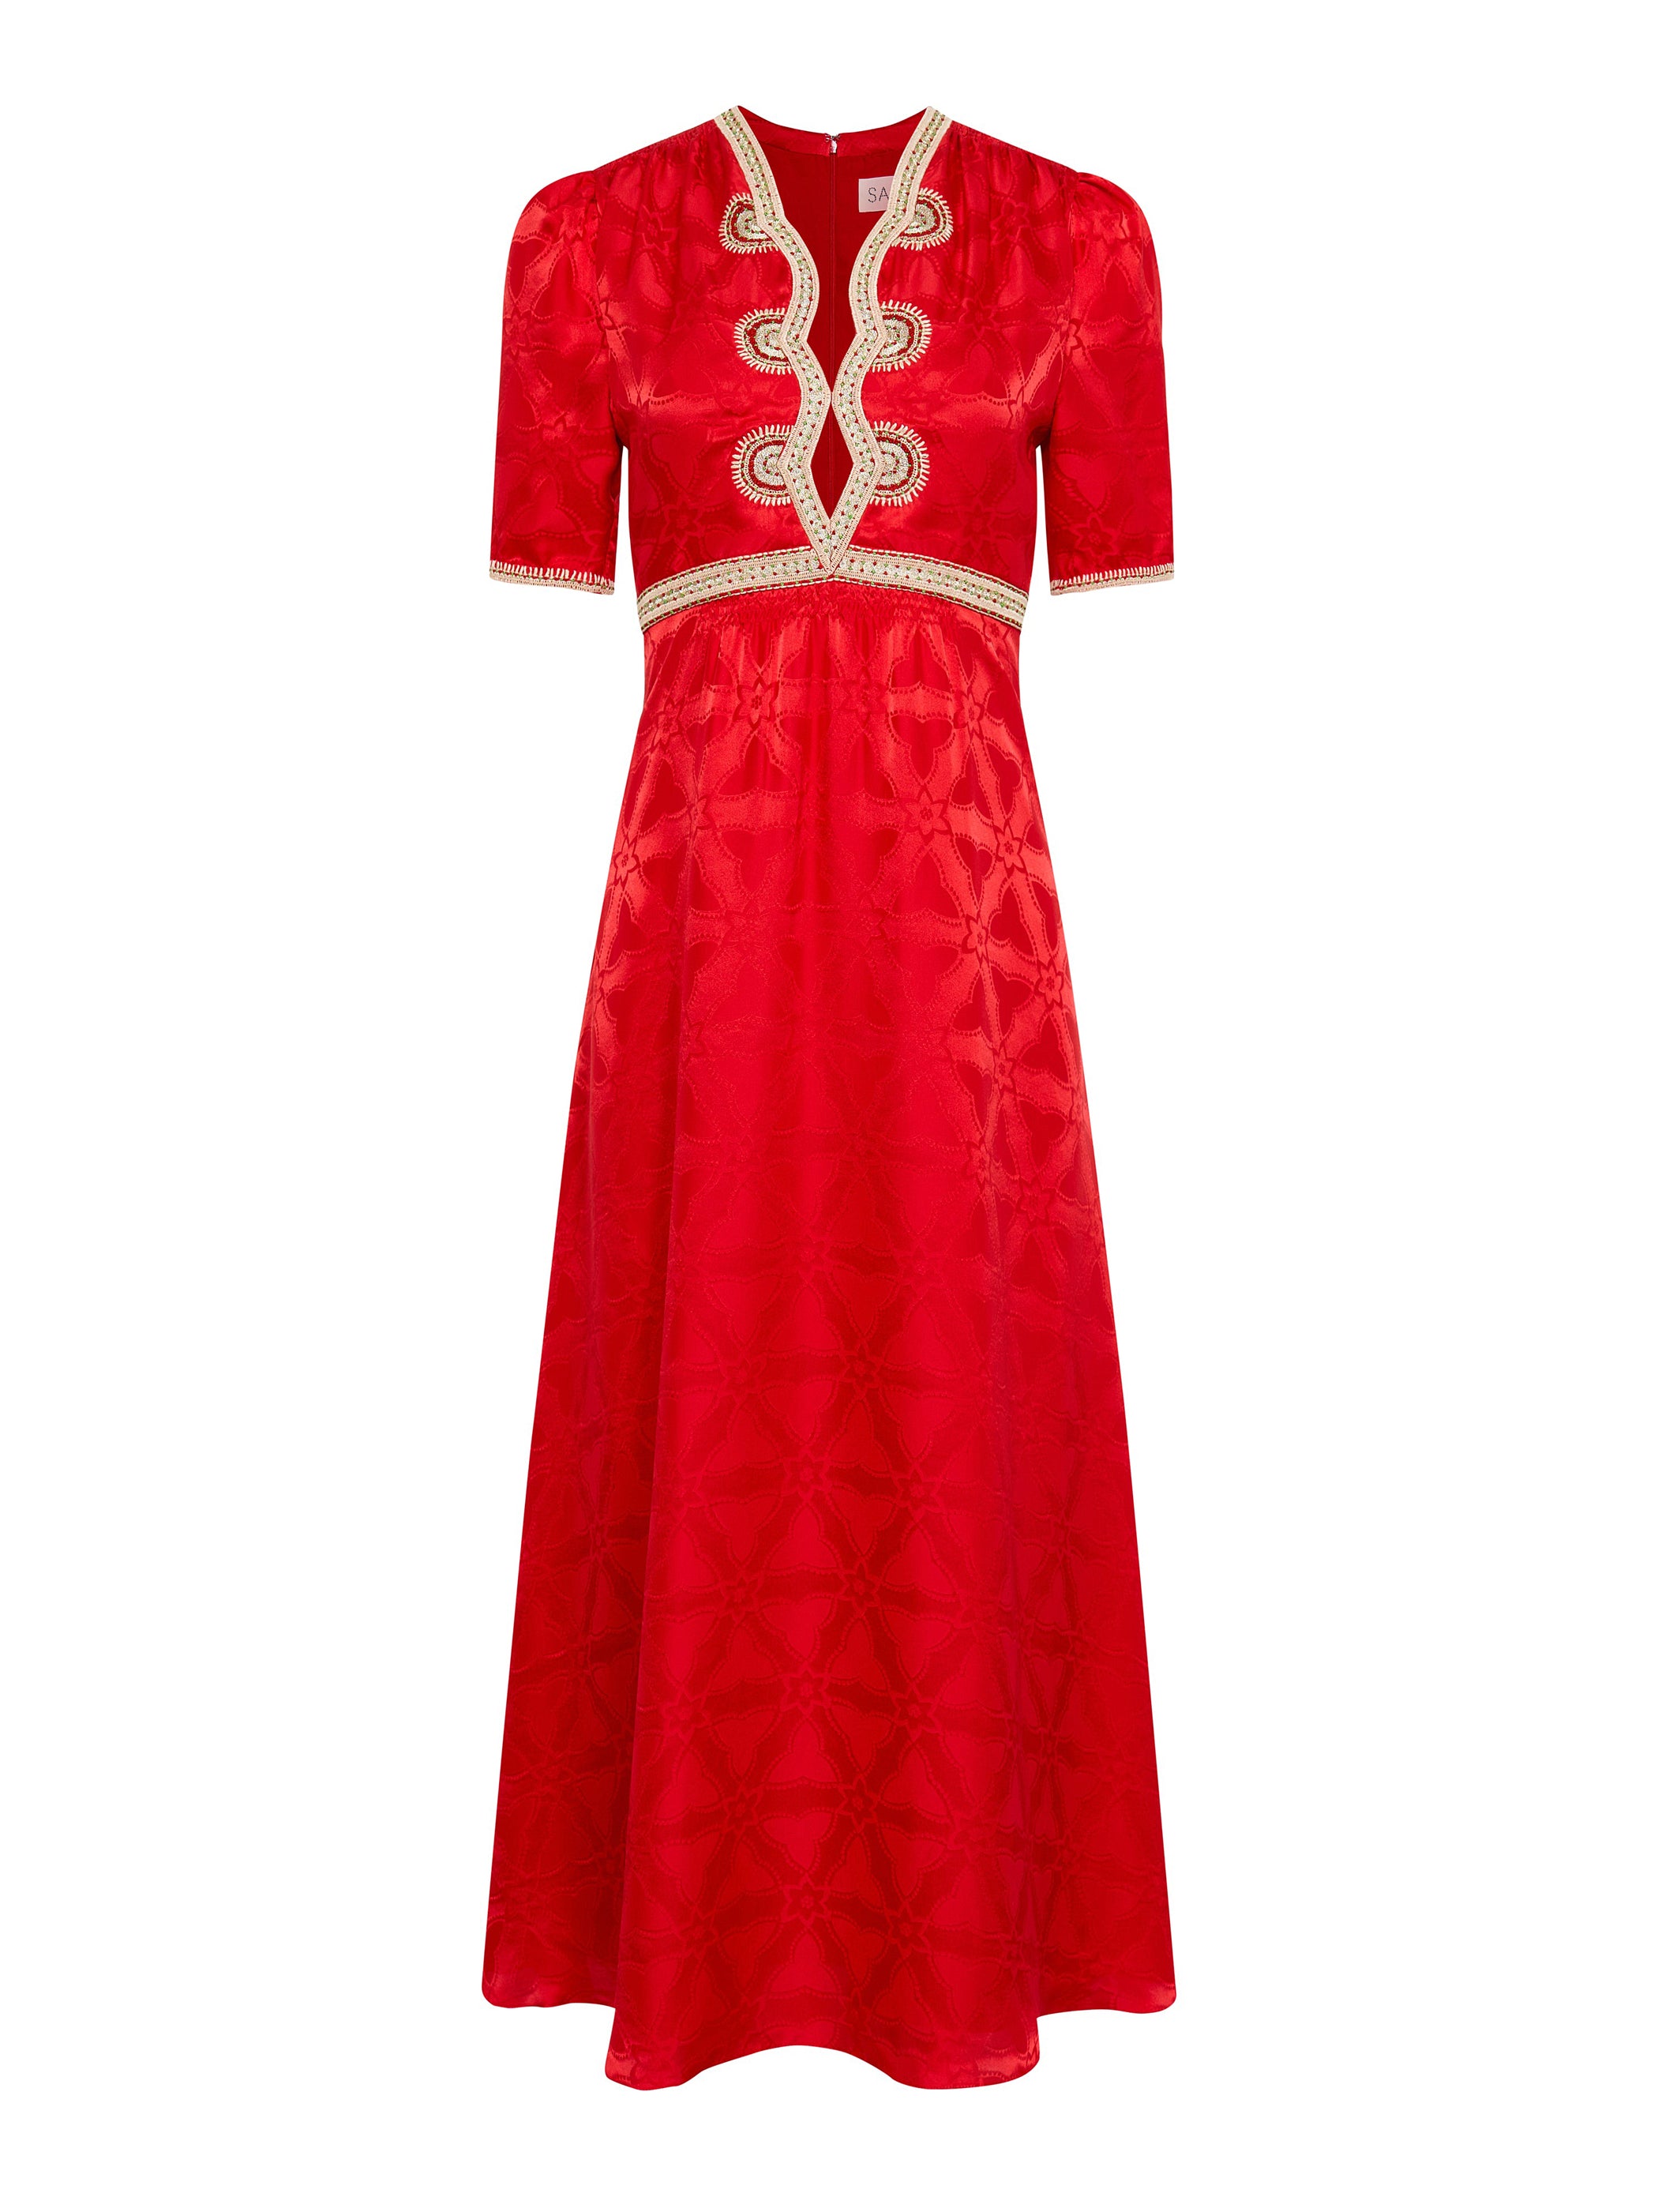 Tabitha C Dress in Scarlet Ornate Embroidery